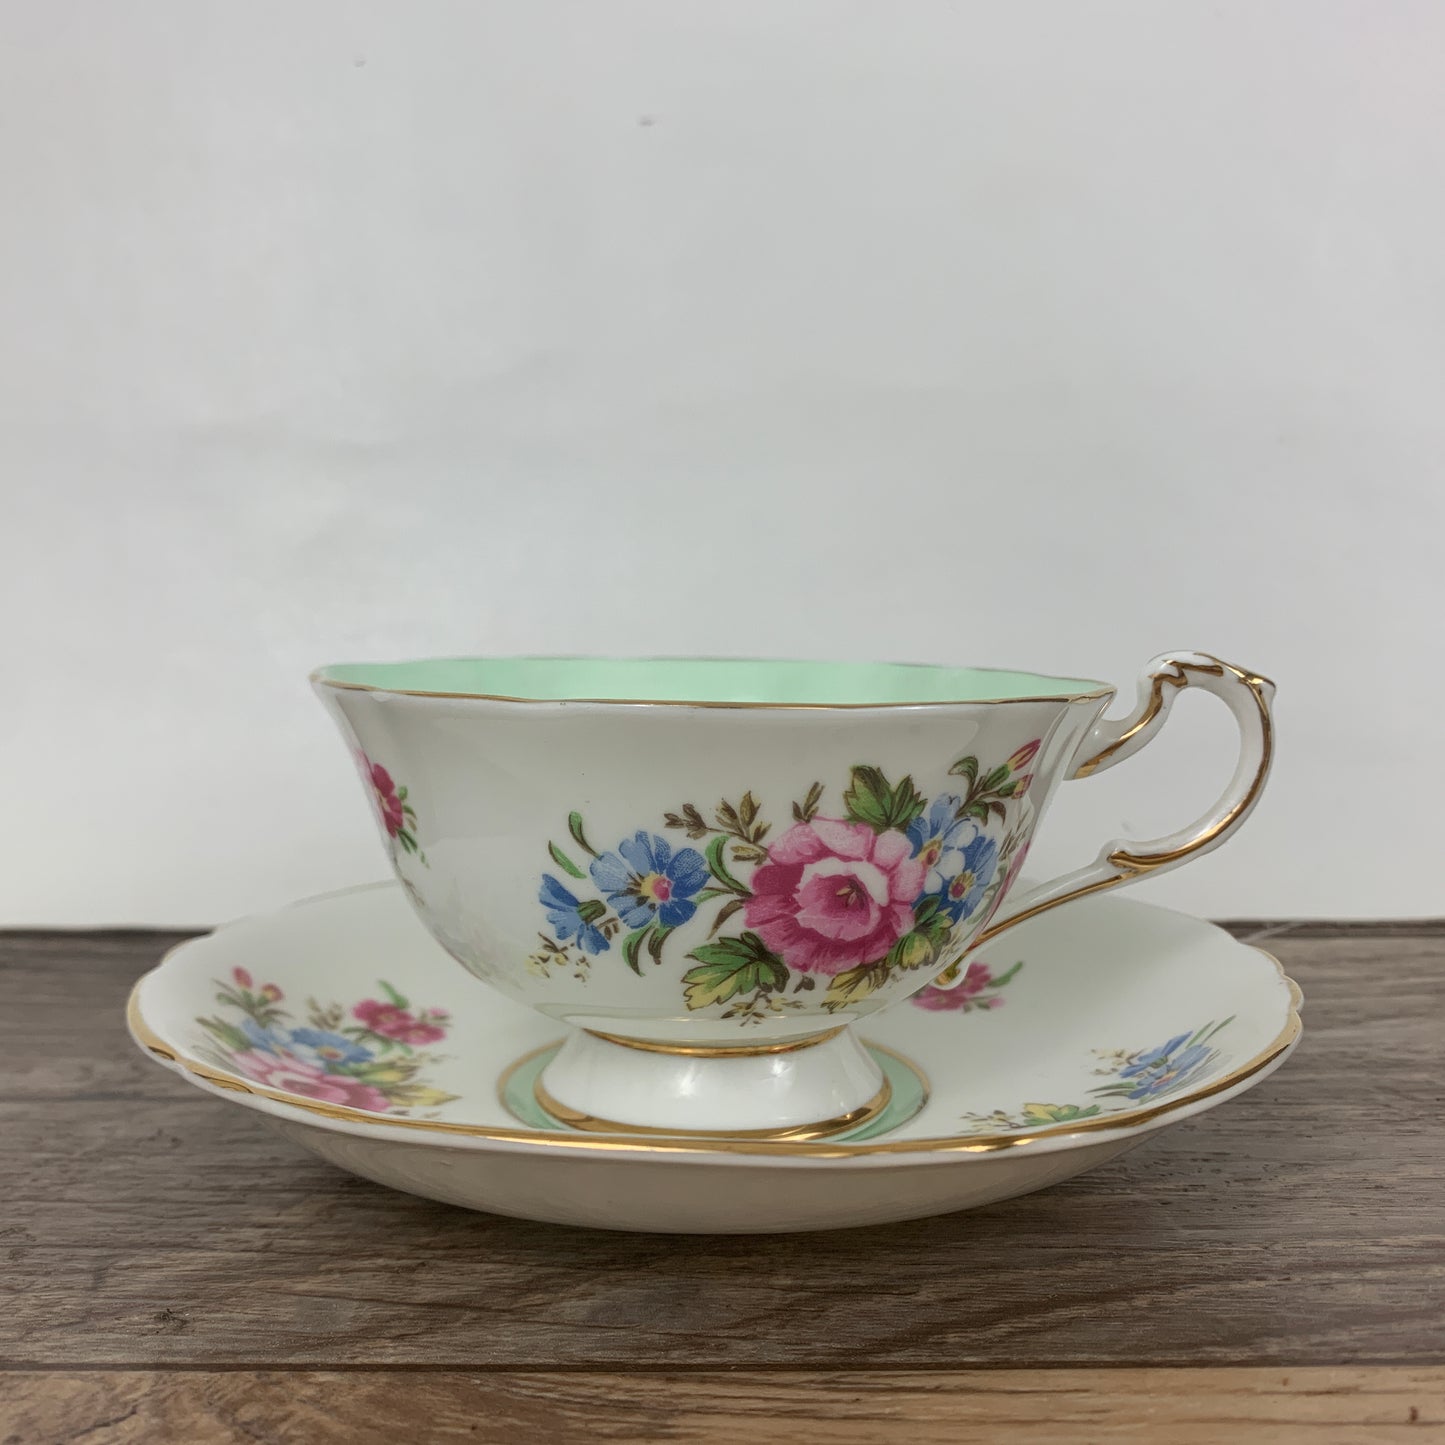 White and Mint Green Double Warrant English Tea Cup Vintage Paragon Teacup,